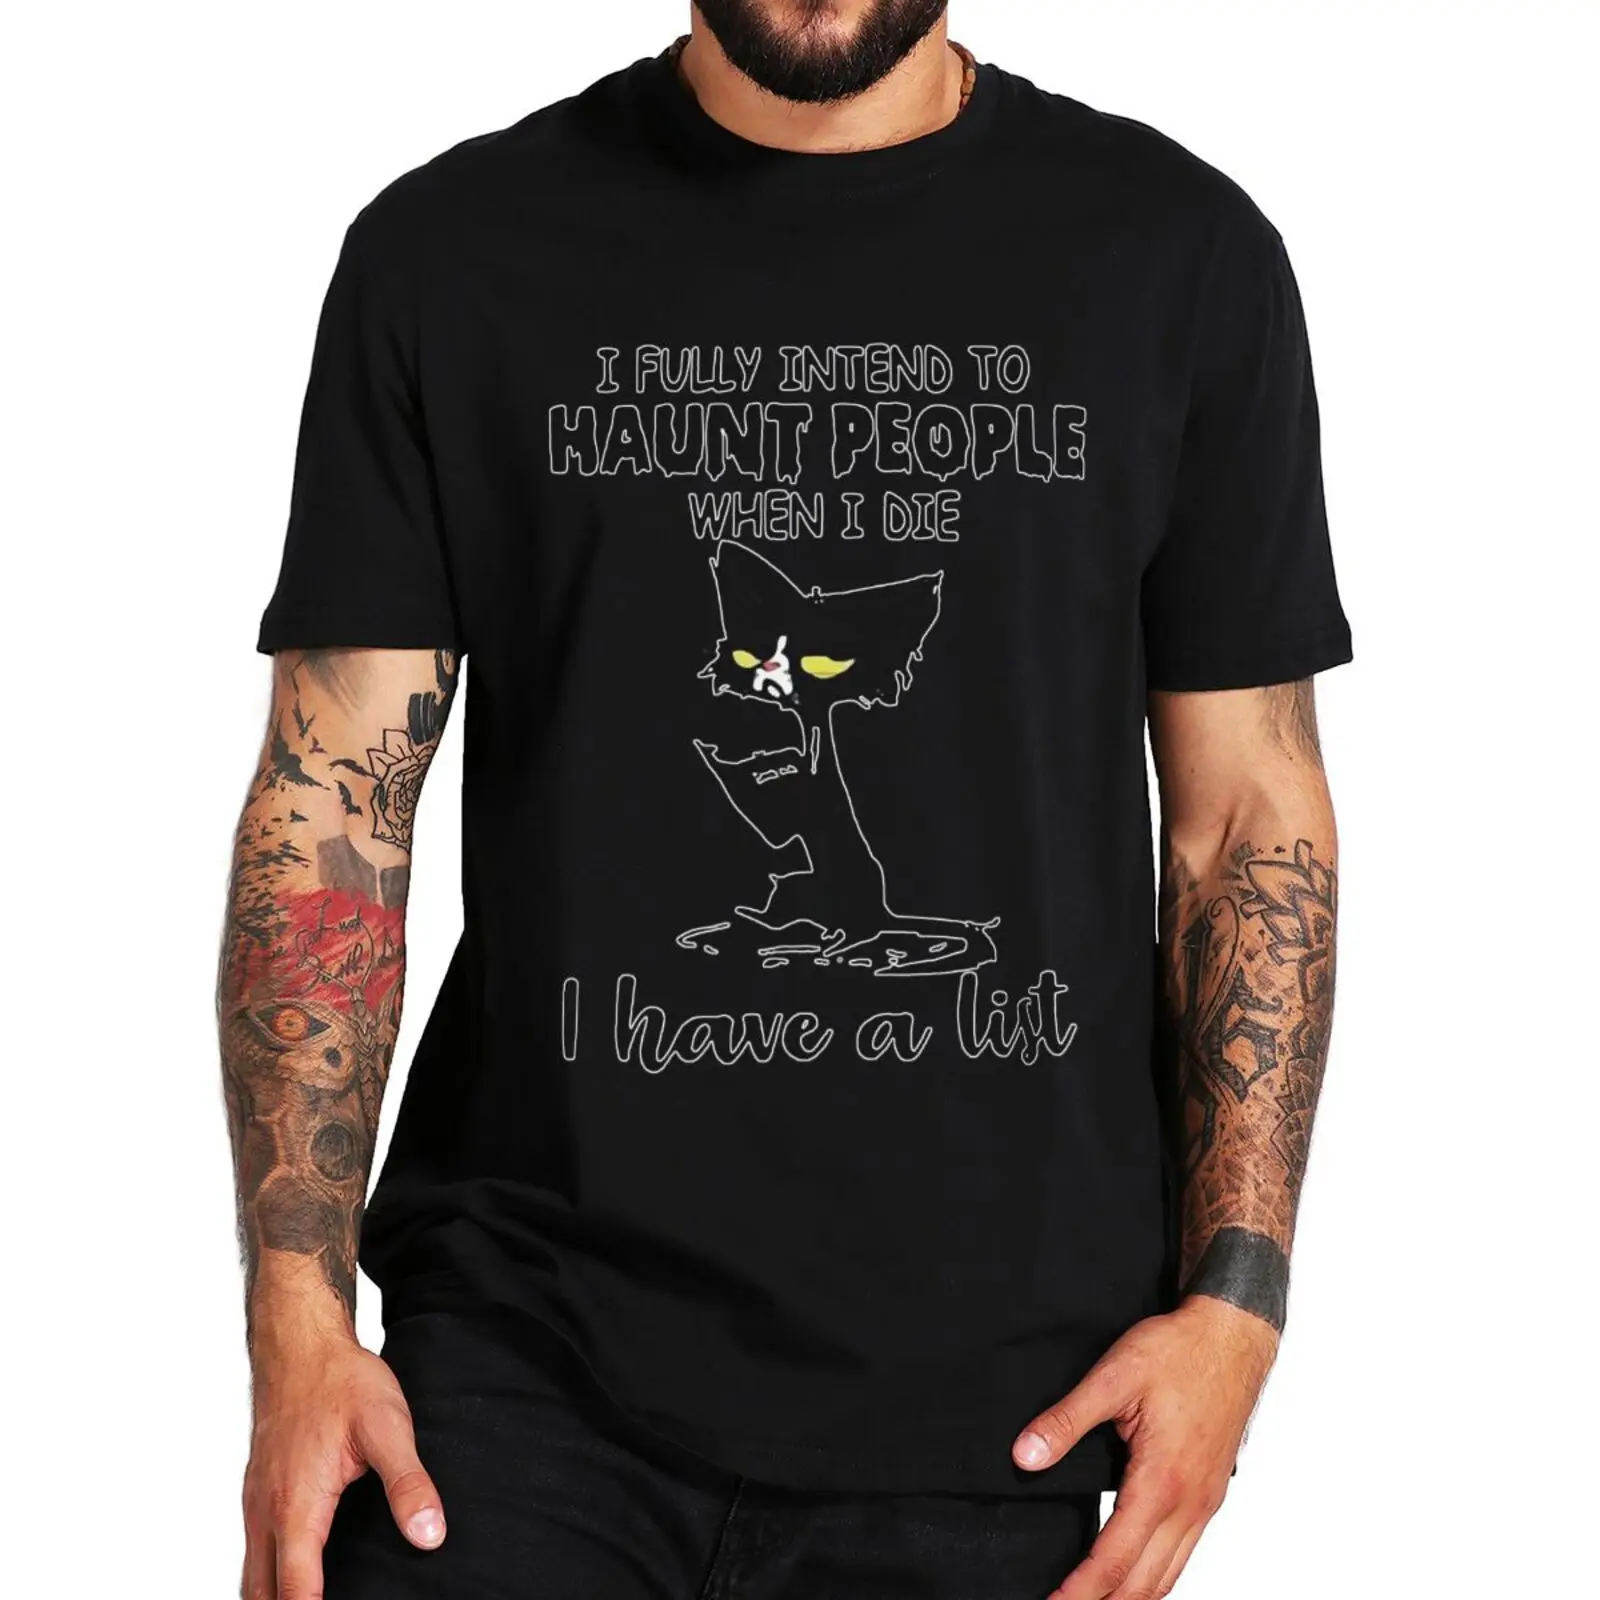 

Cat I Fully To With People When I Die T Shirt Funny Jokes Humor Slogan Tee Tops Summer Casual Cotton Unisex T-shirt EU Size